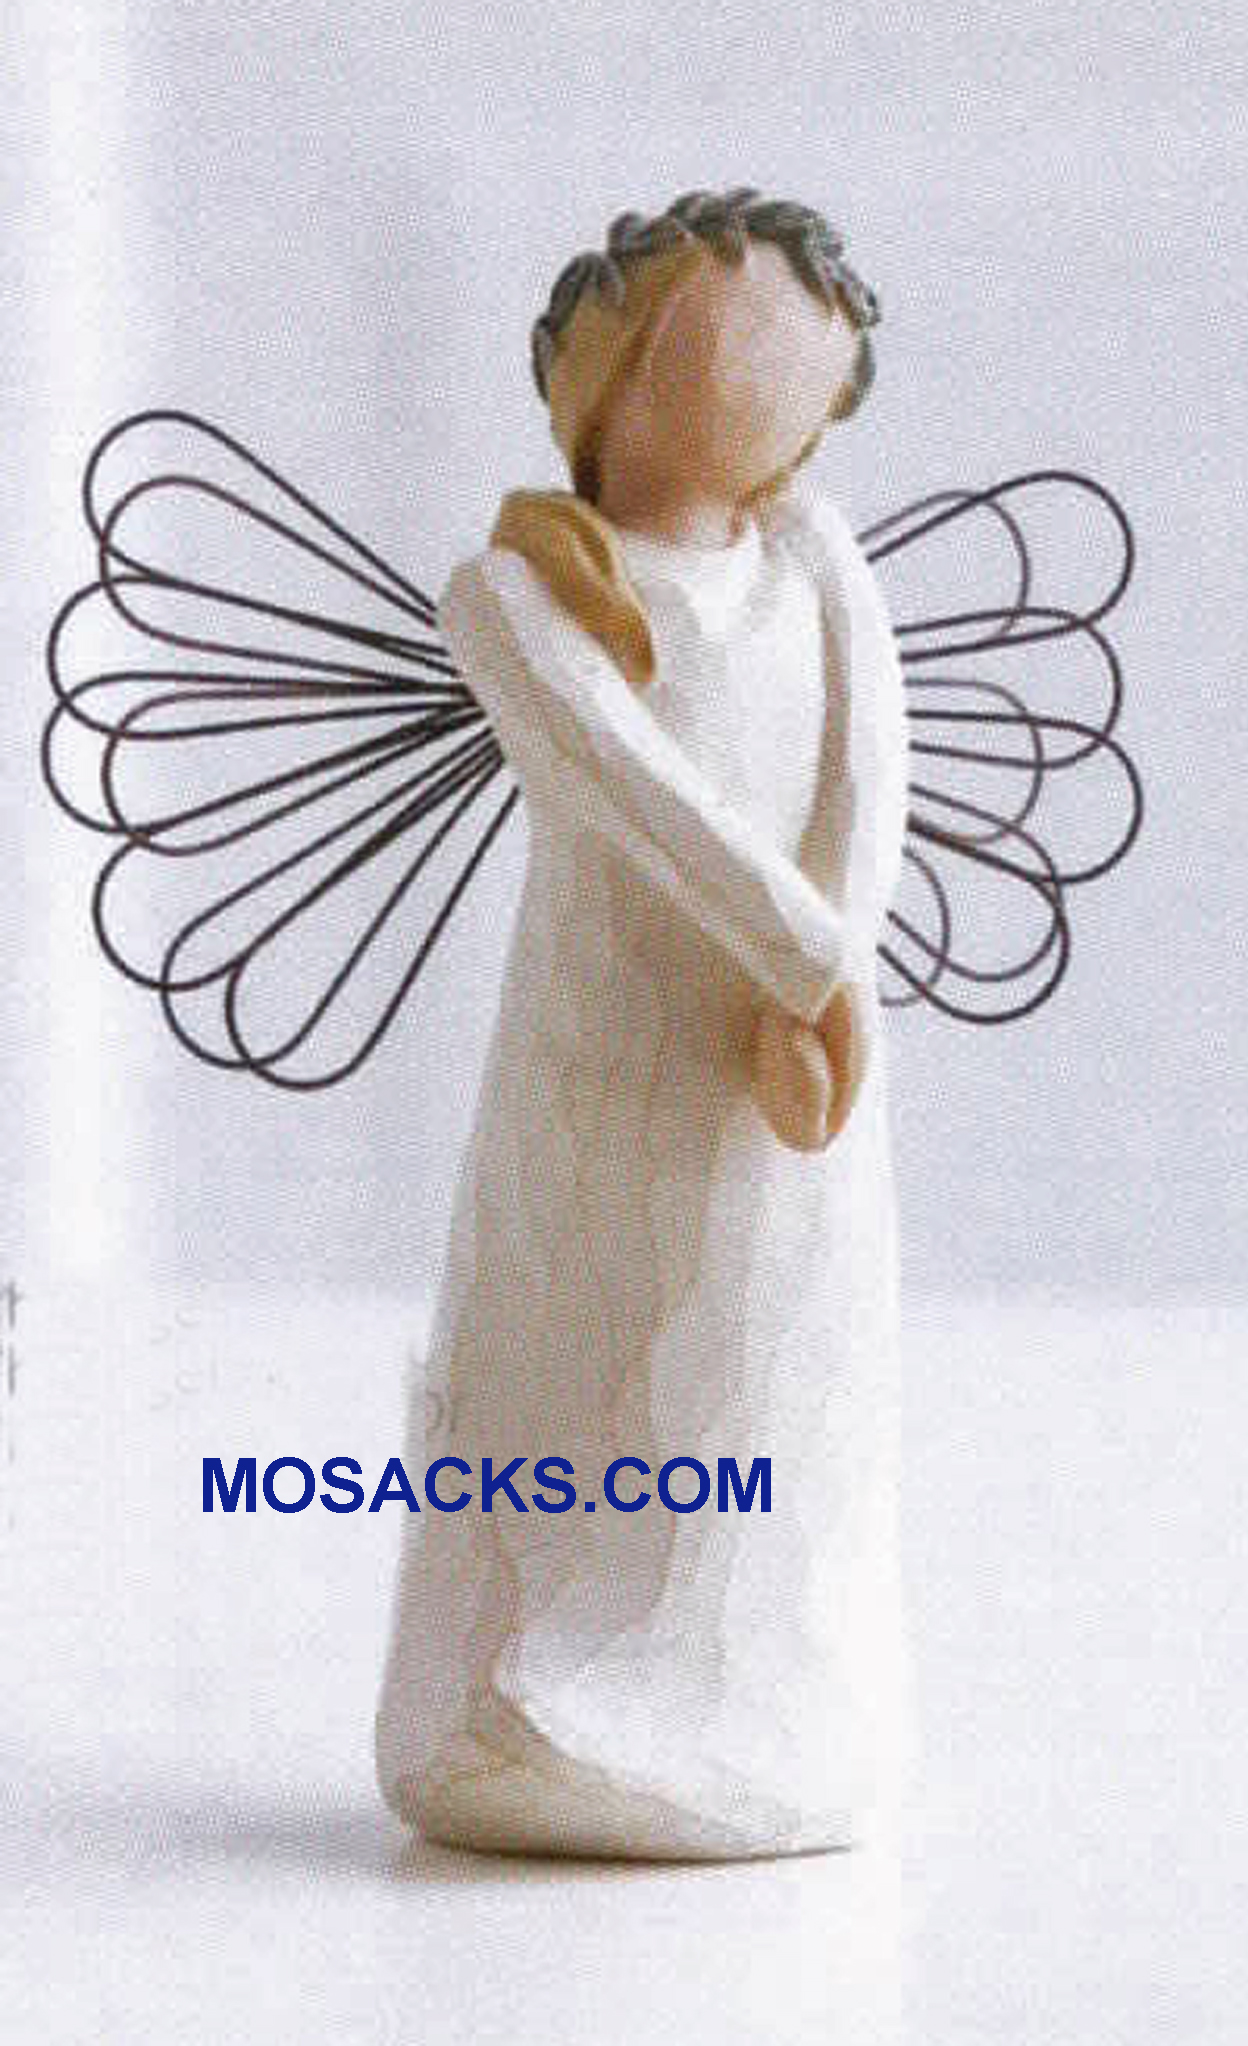 Willow Tree® Angels